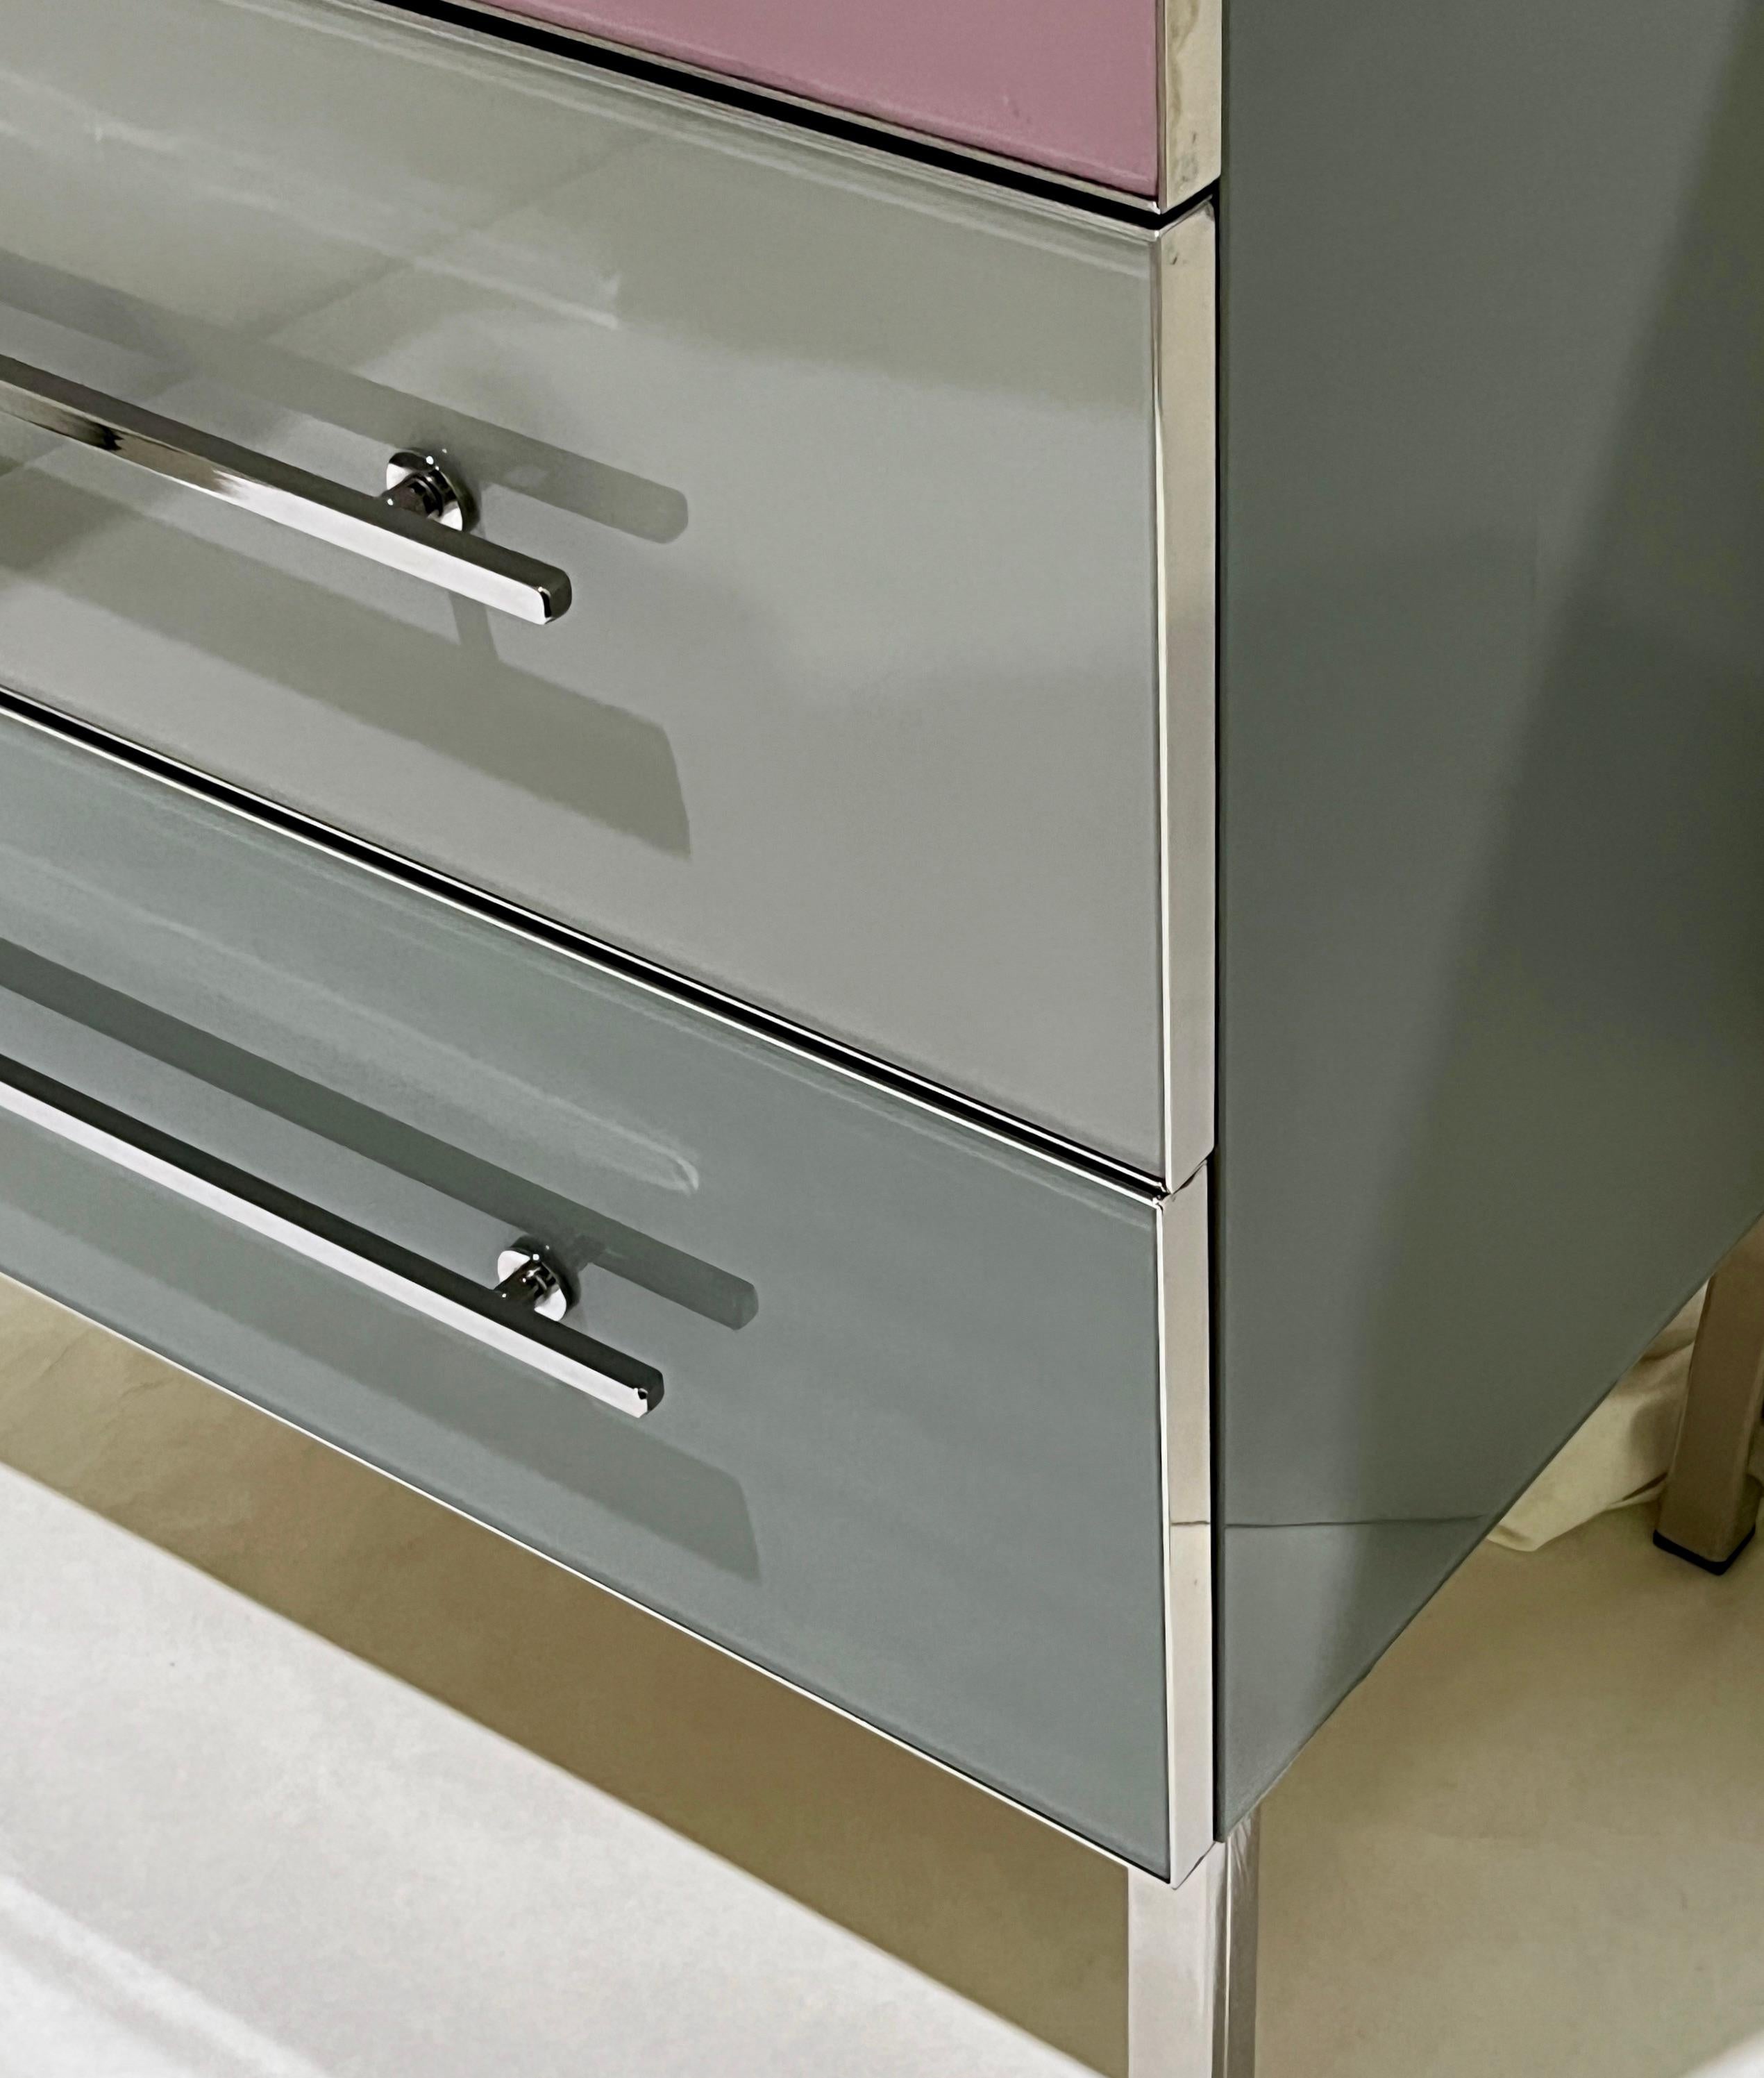 Bespoke Italian Post-Modern Pink Gray Glass 3-Drawer Nickel Chest Nightstand In New Condition For Sale In New York, NY